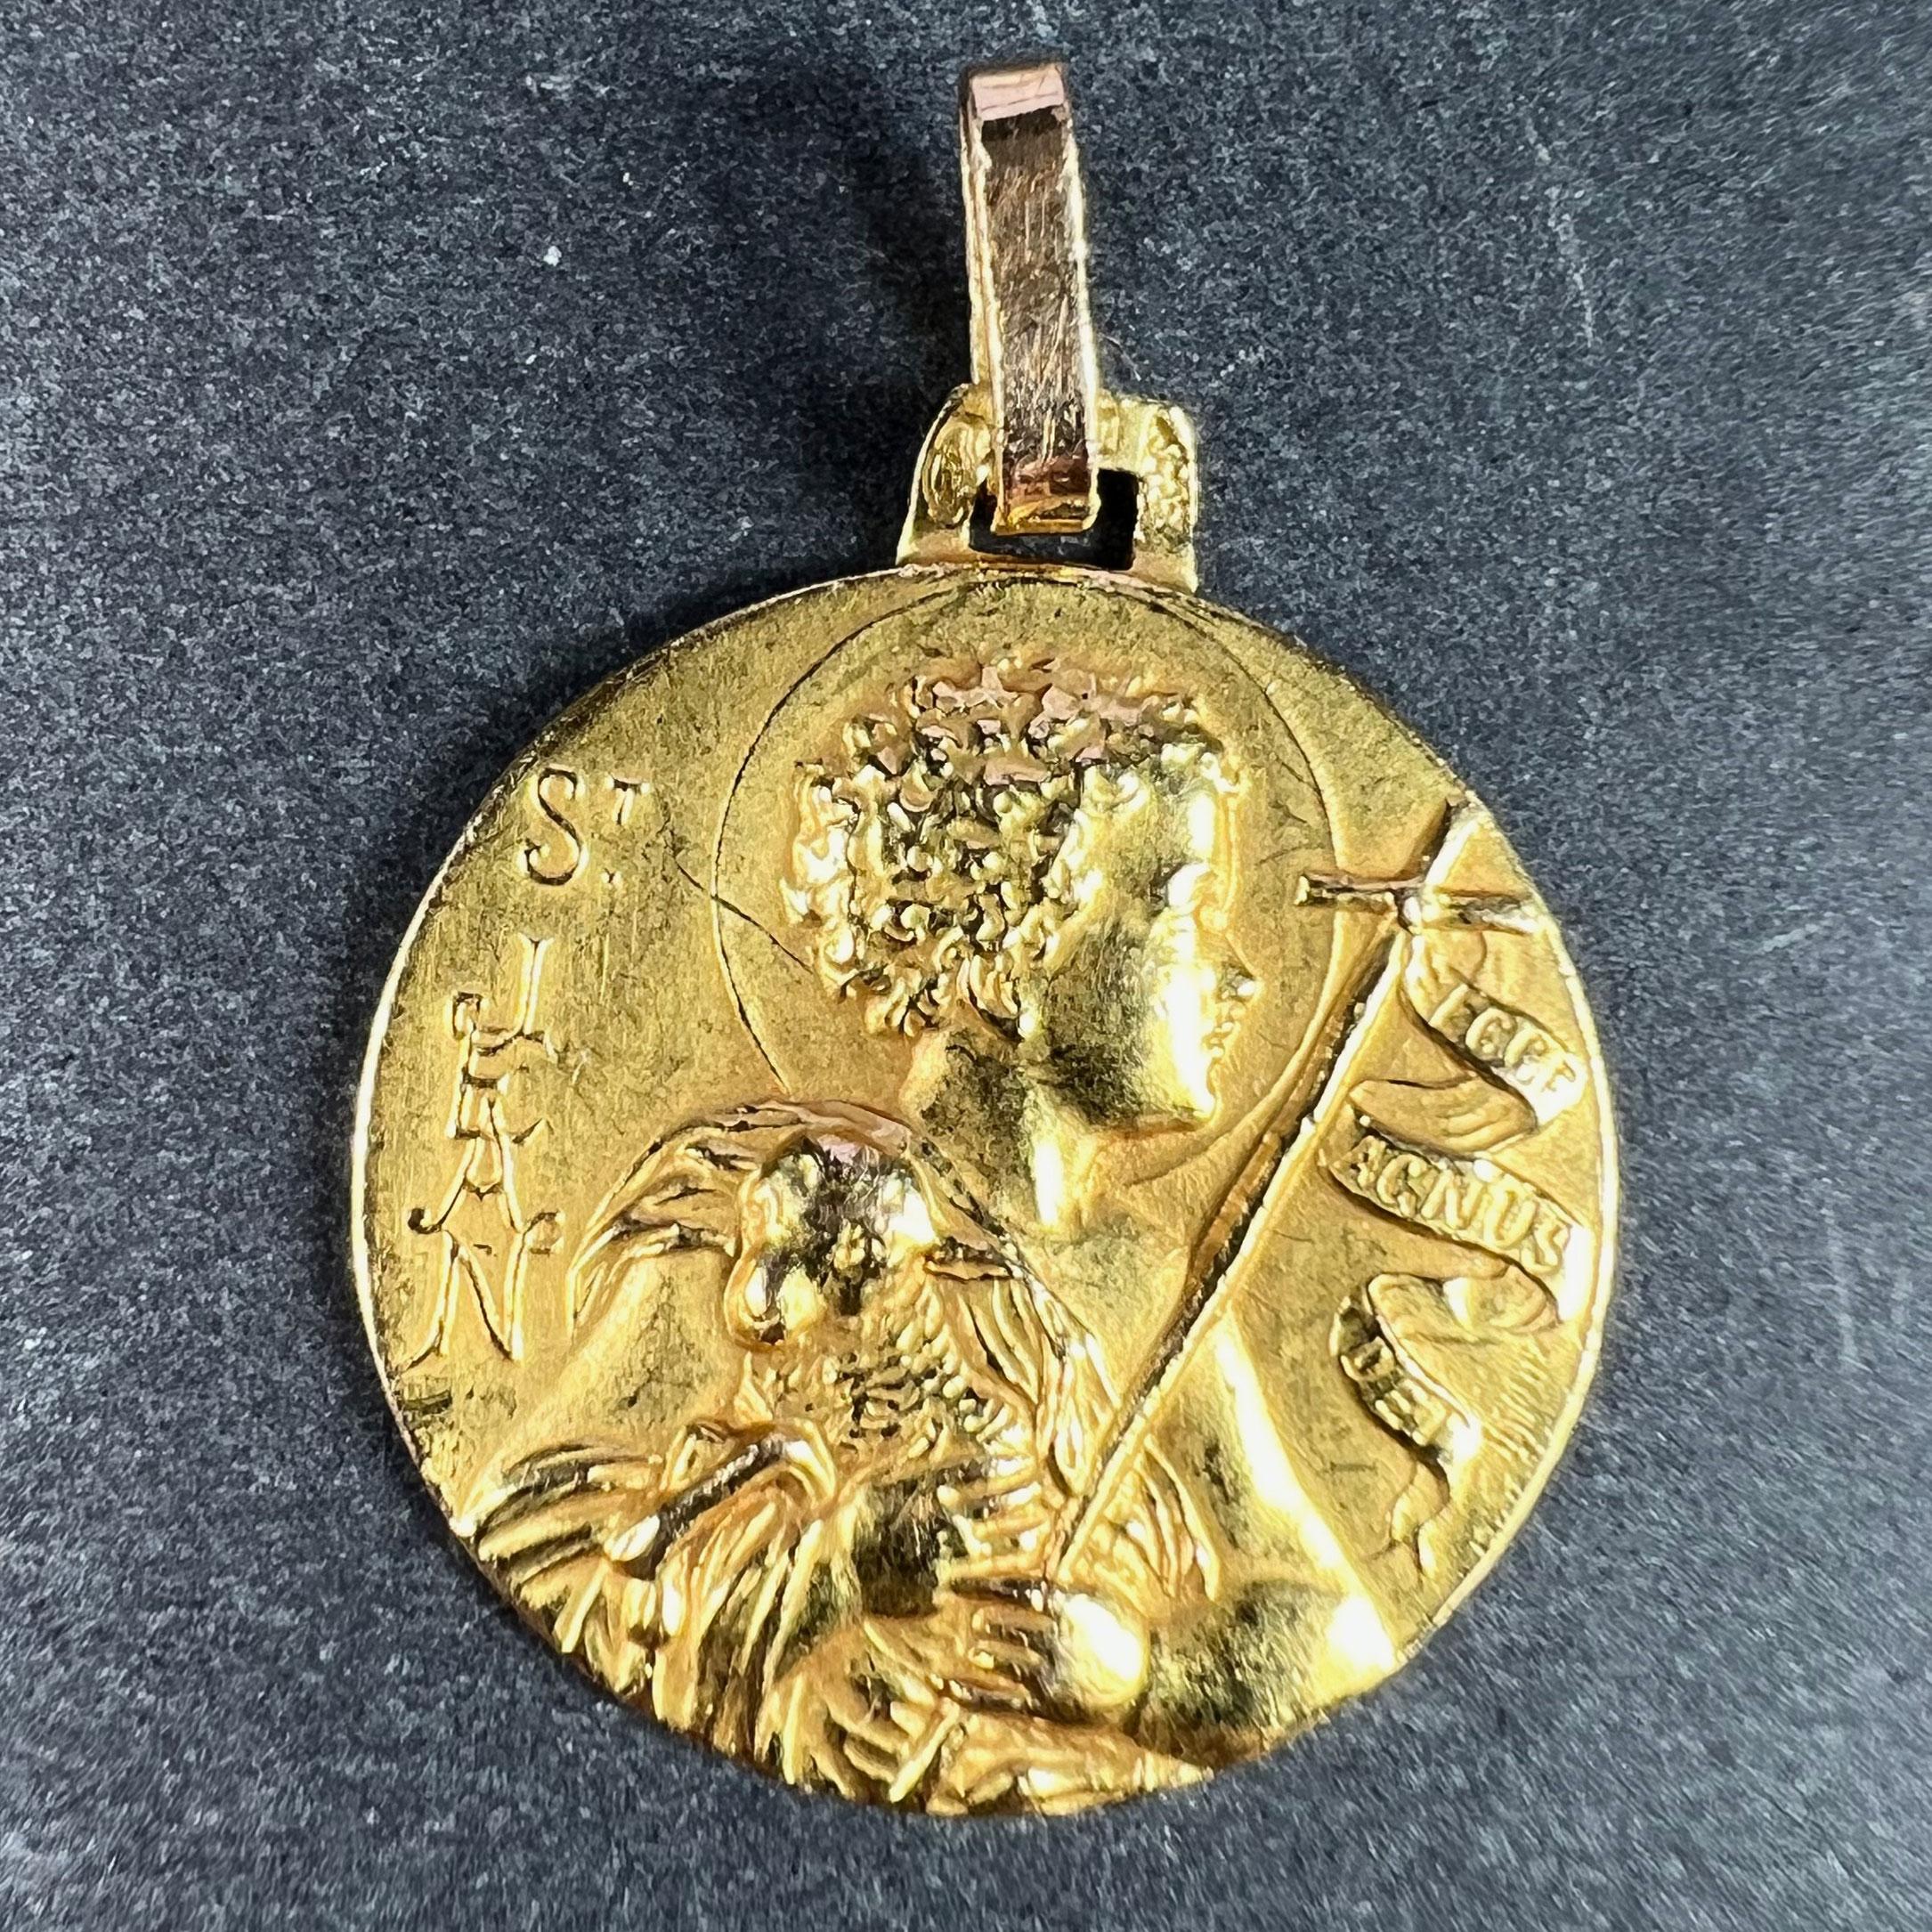 A French 18 karat (18K) yellow gold charm pendant designed as a medal representing Saint John the Baptist as a child with a cross and a sheep. The cross with a ribbon attached saying 'Ecce Agnus Dei' (Behold the Lamb of God). Signed by an unknown